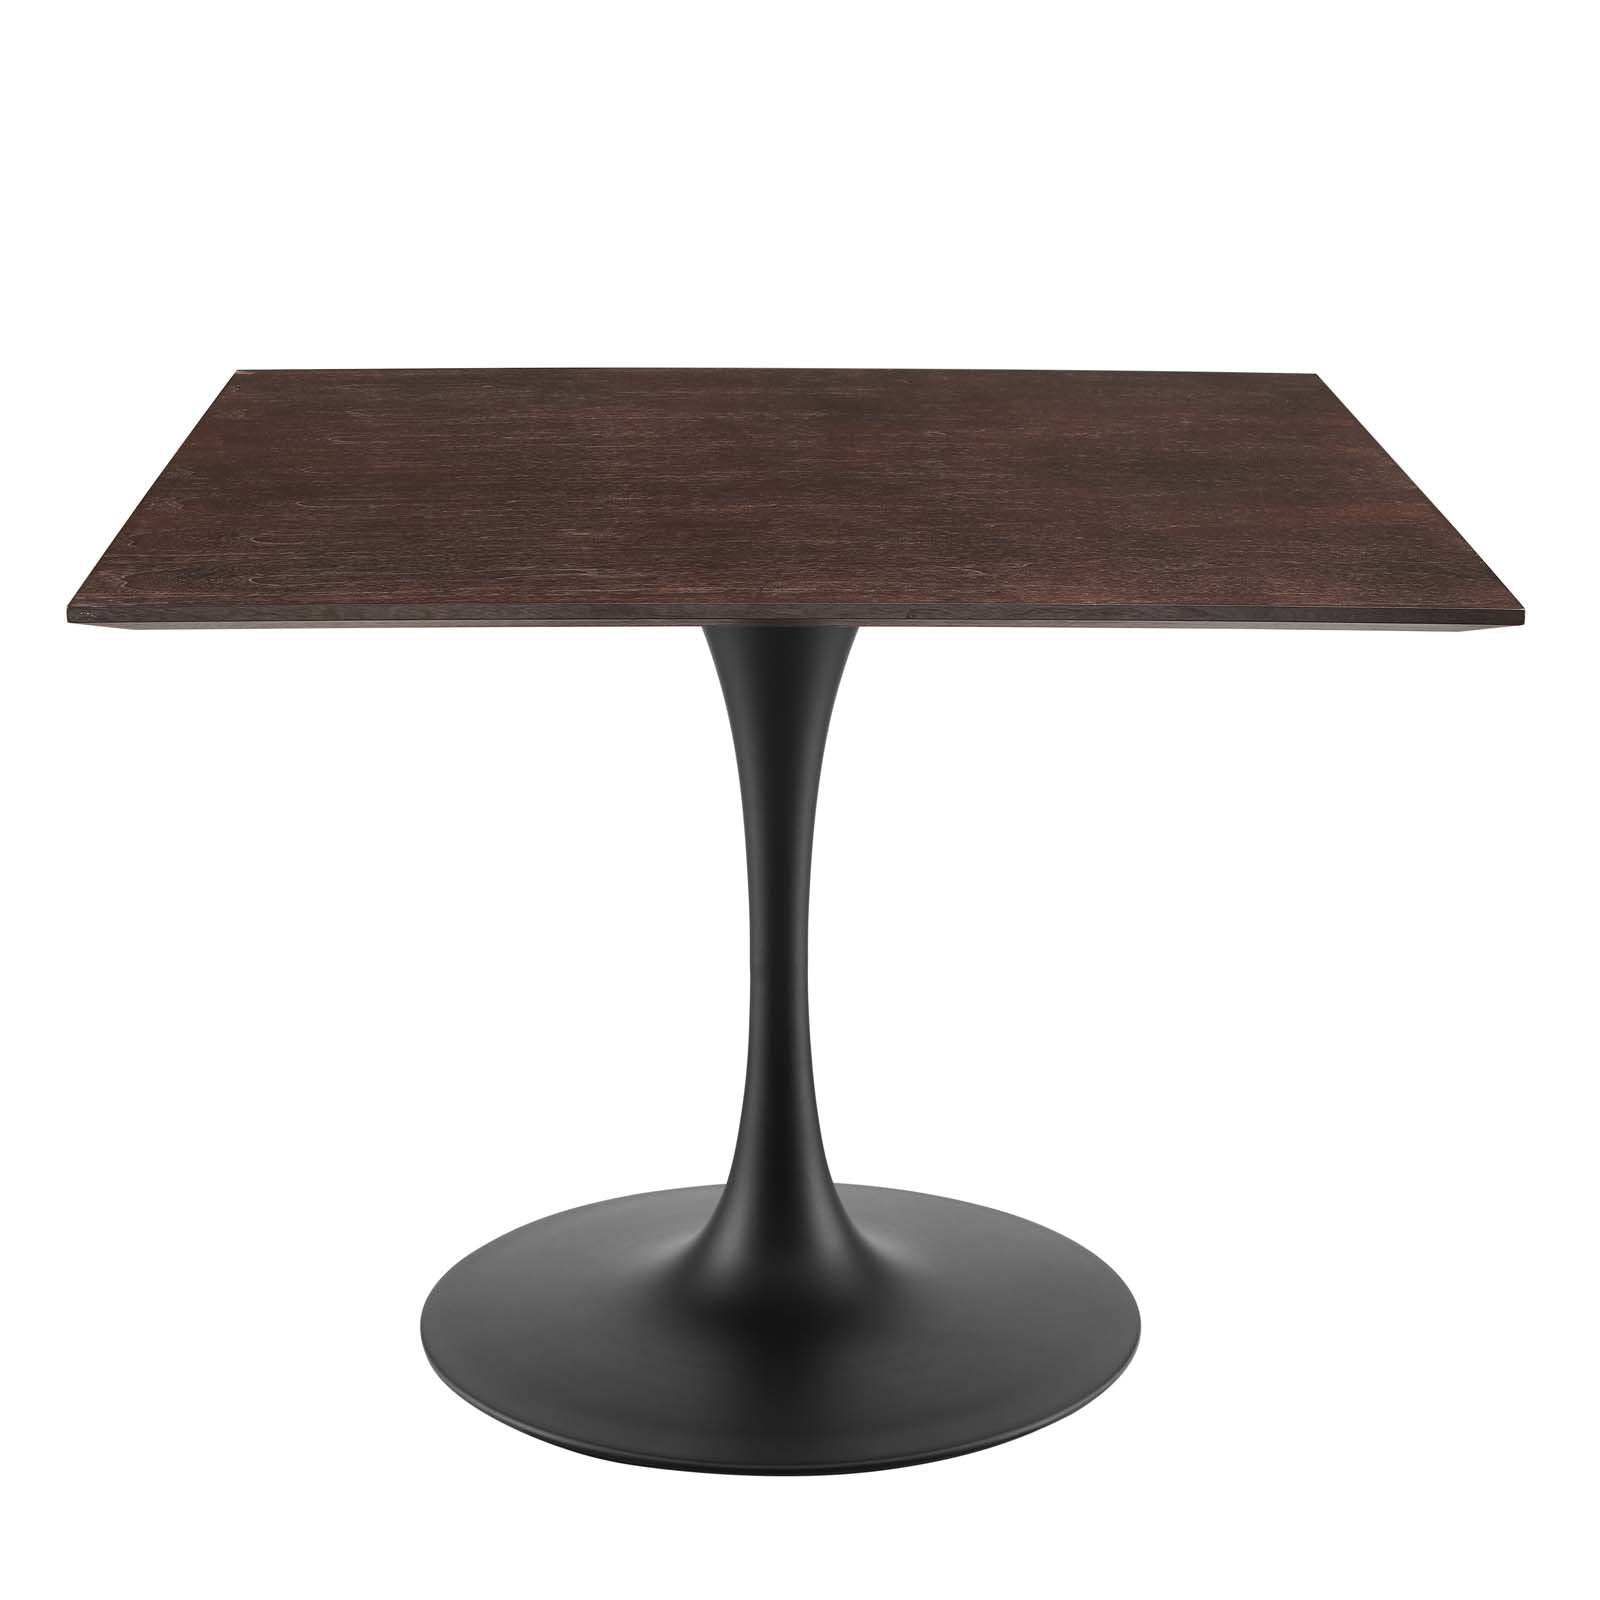 Lippa 40" Wood Square Dining Table - East Shore Modern Home Furnishings